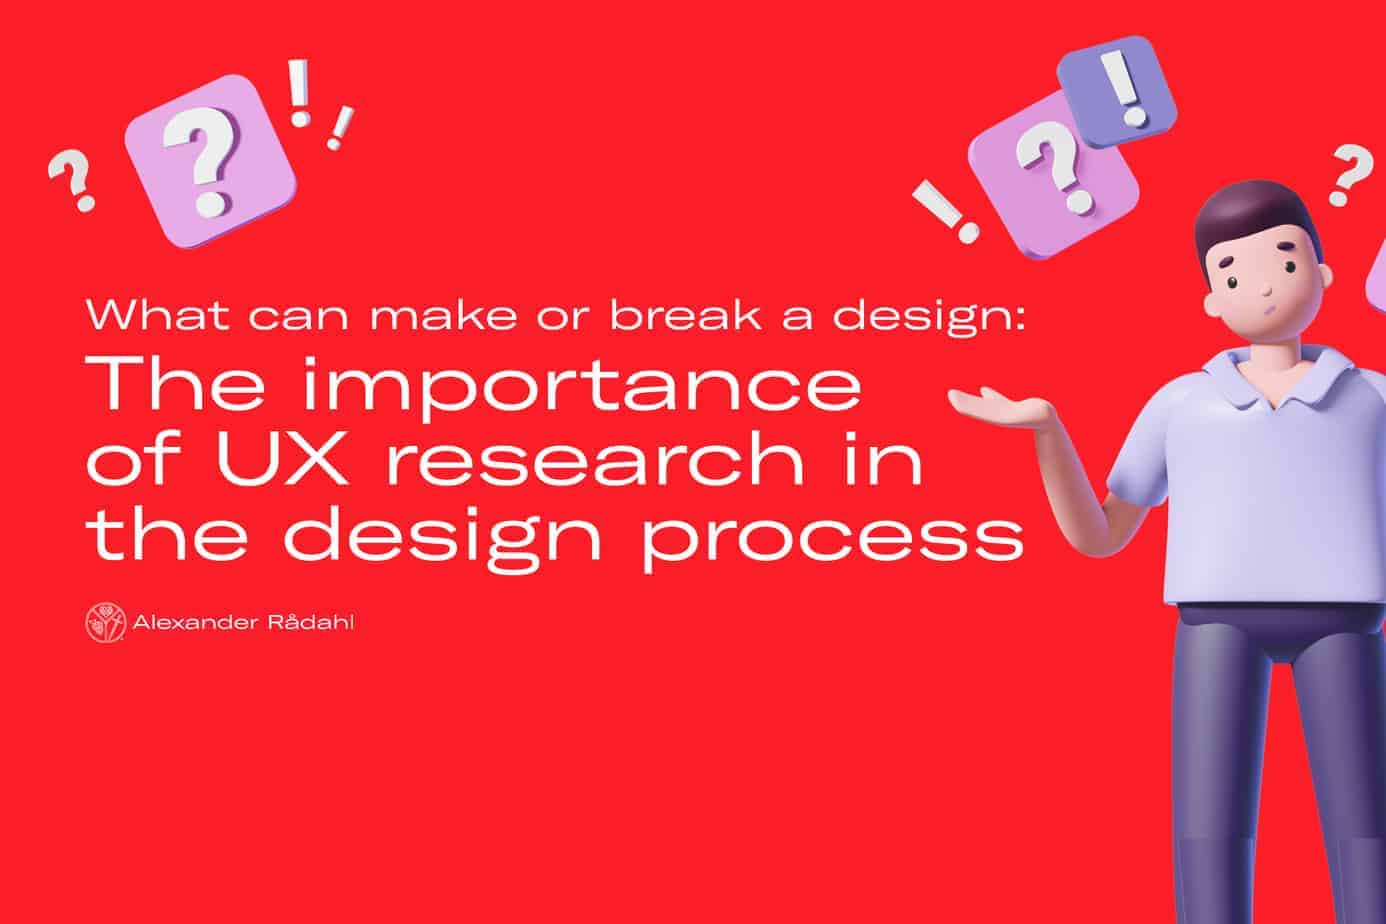 The importance of ux research in the design process: what can make or break a design for users